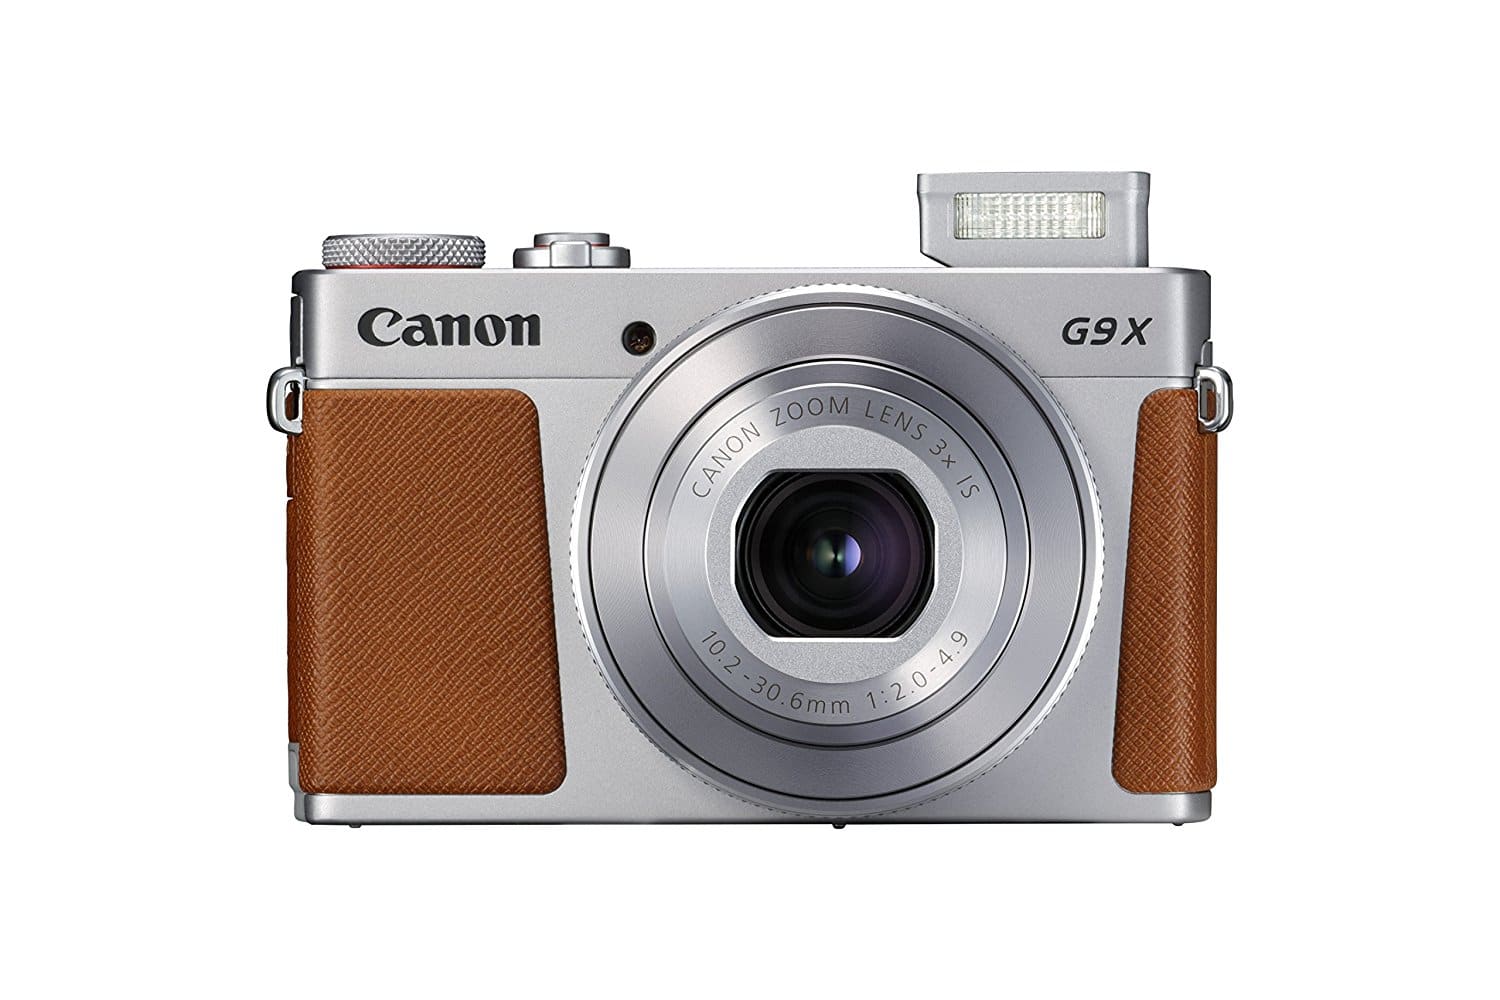 best cameras for travelers, best travel camera, best travel video camera, best camera, good camera for photography, best adventure camera, best compact camera for travel, best digital camera for travel photography, good camera, best camera for video and photo.